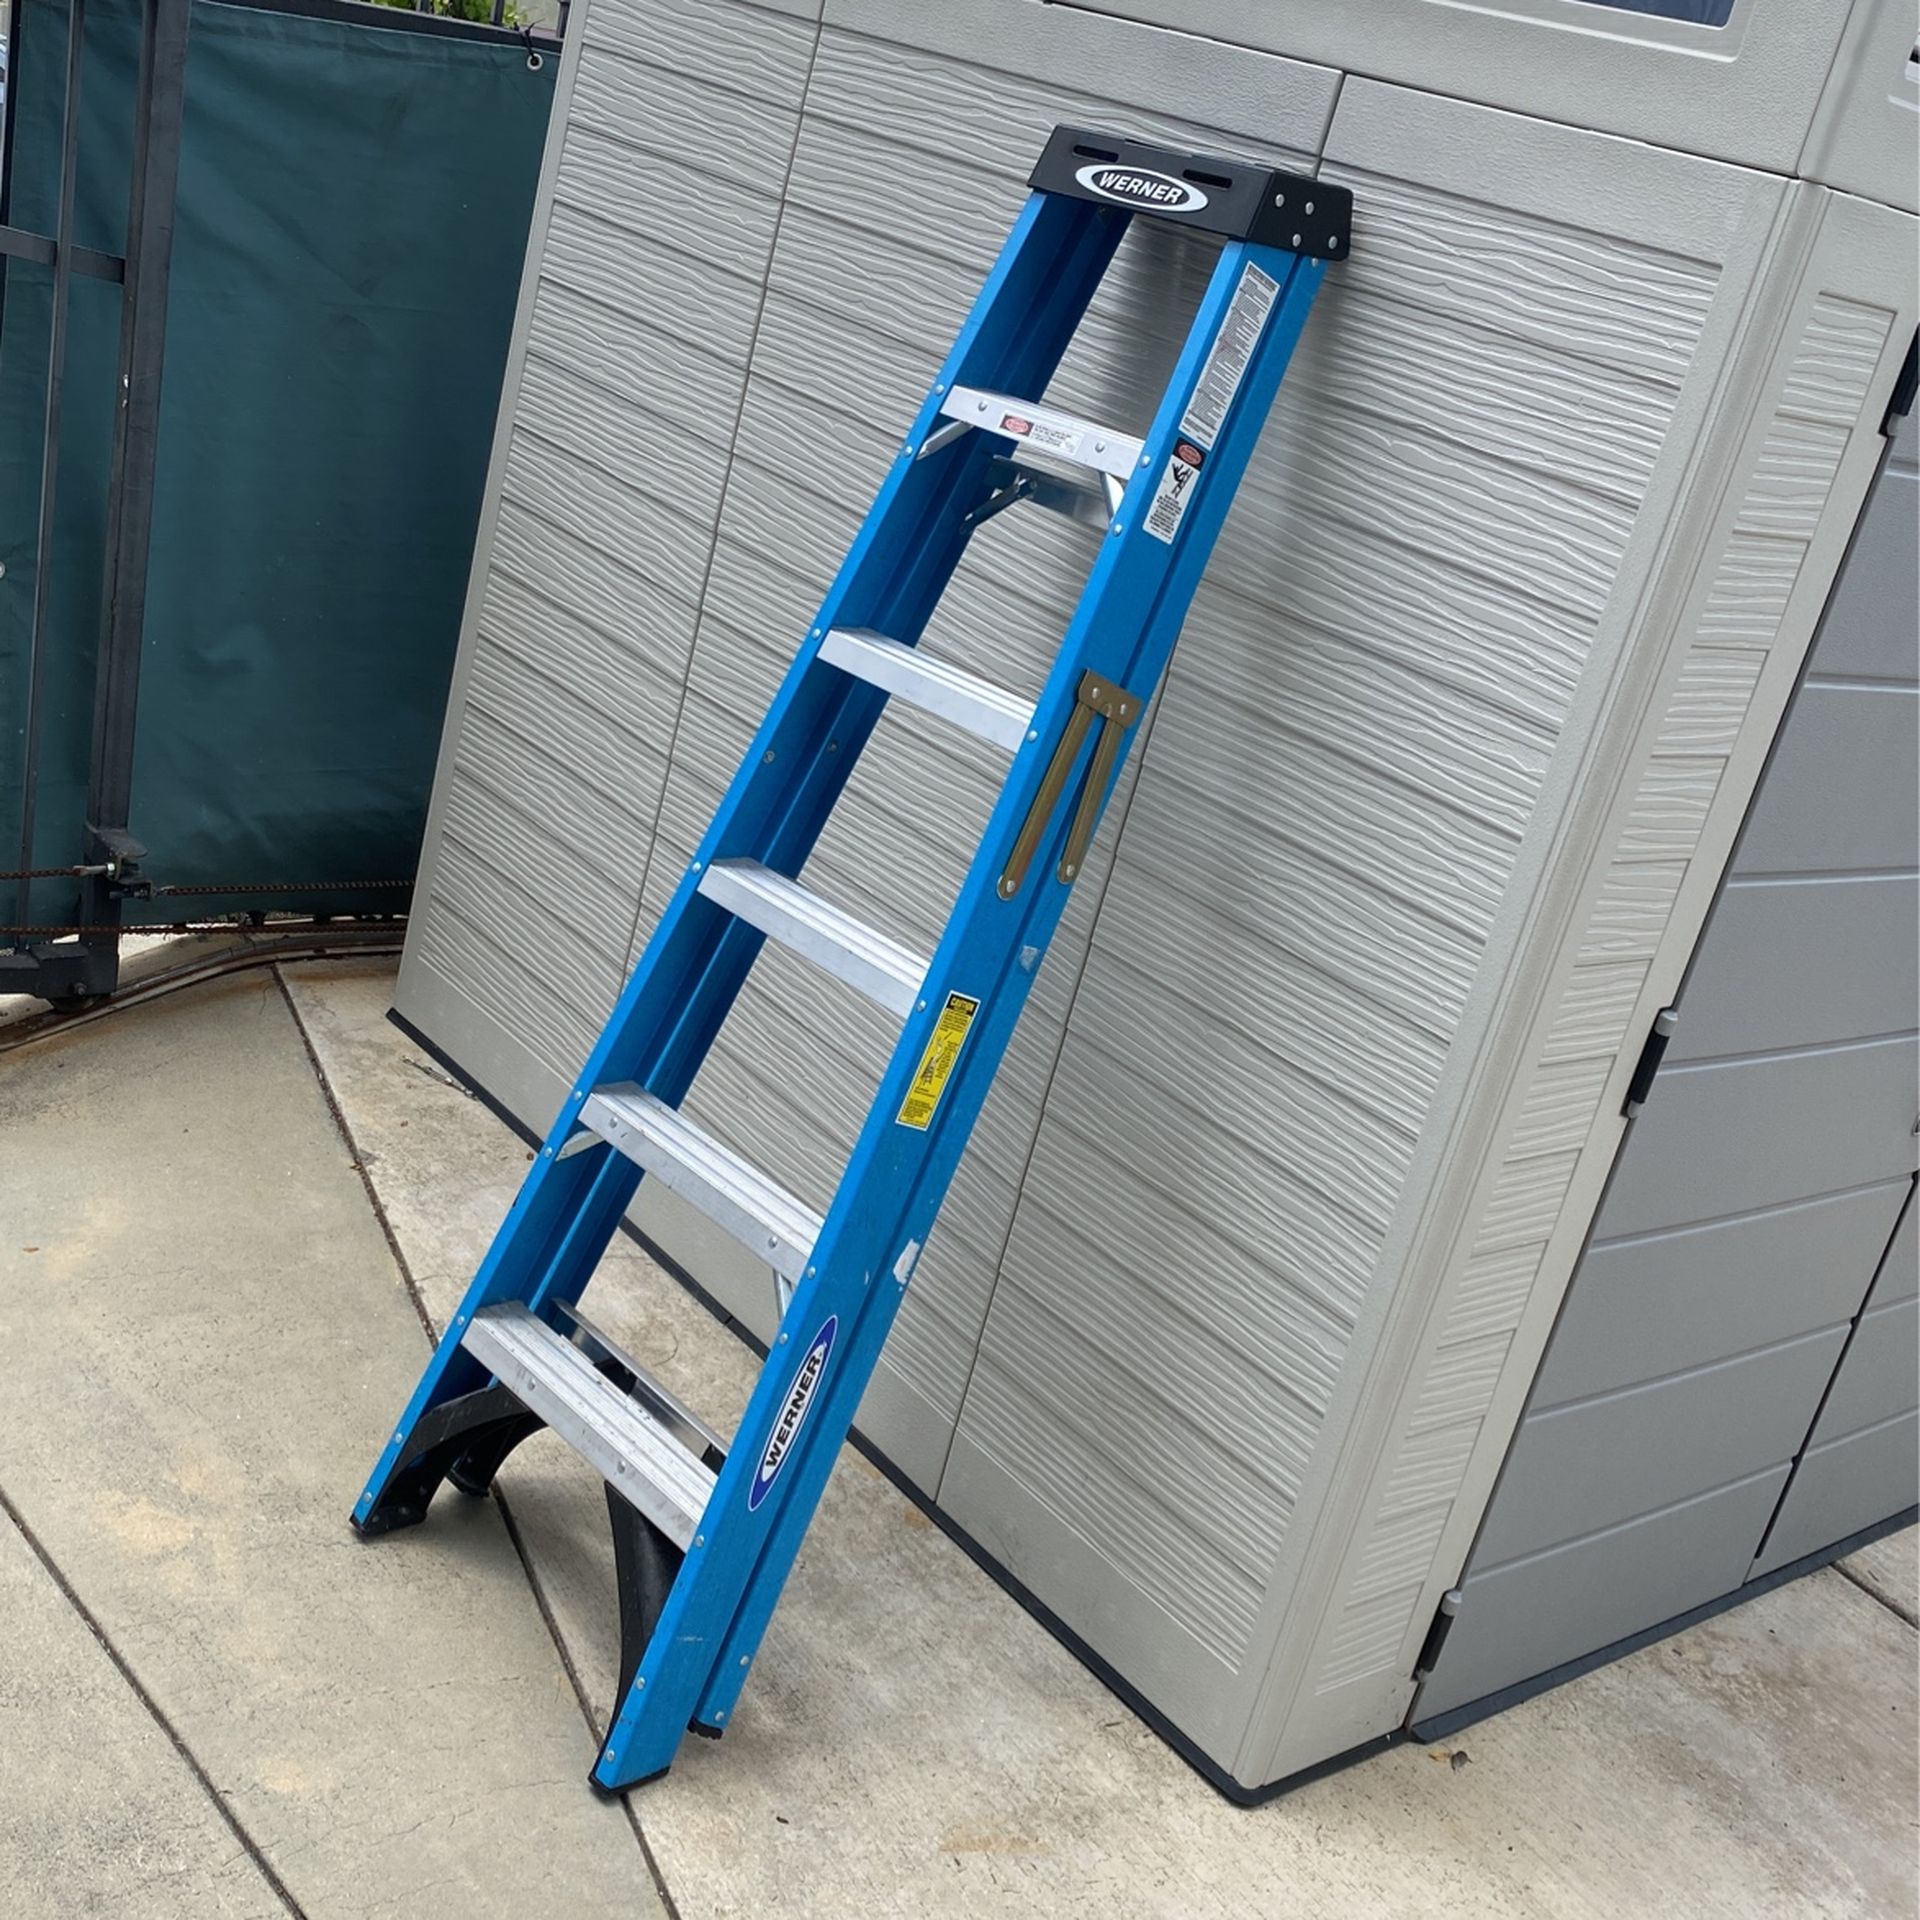 Werner 6ft Ladder - If Ad Is Up It’s Available!